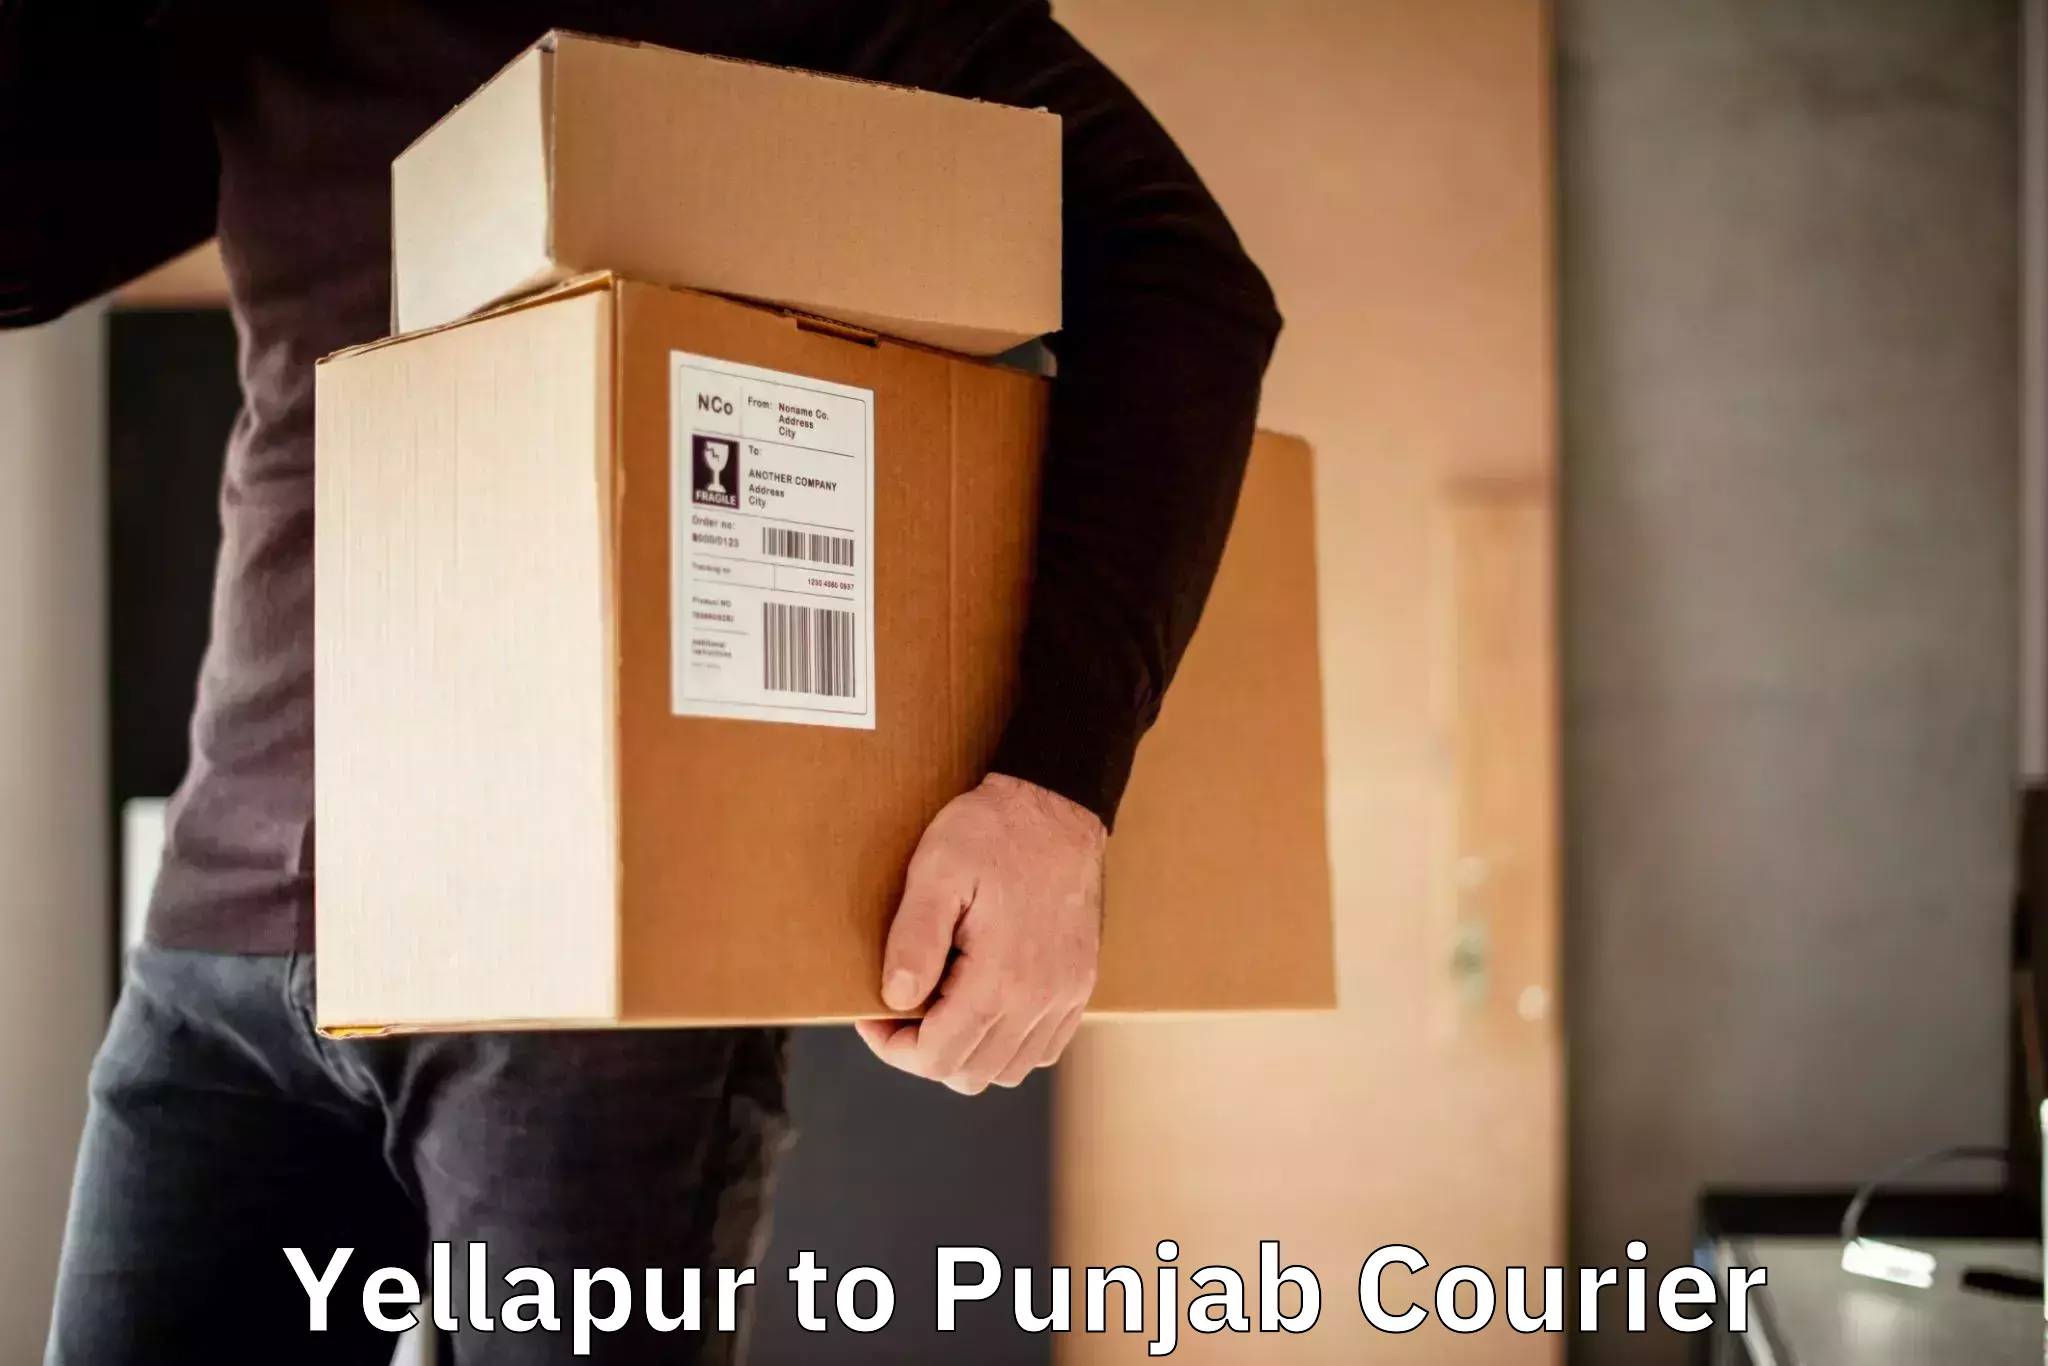 Fast delivery service Yellapur to Punjab